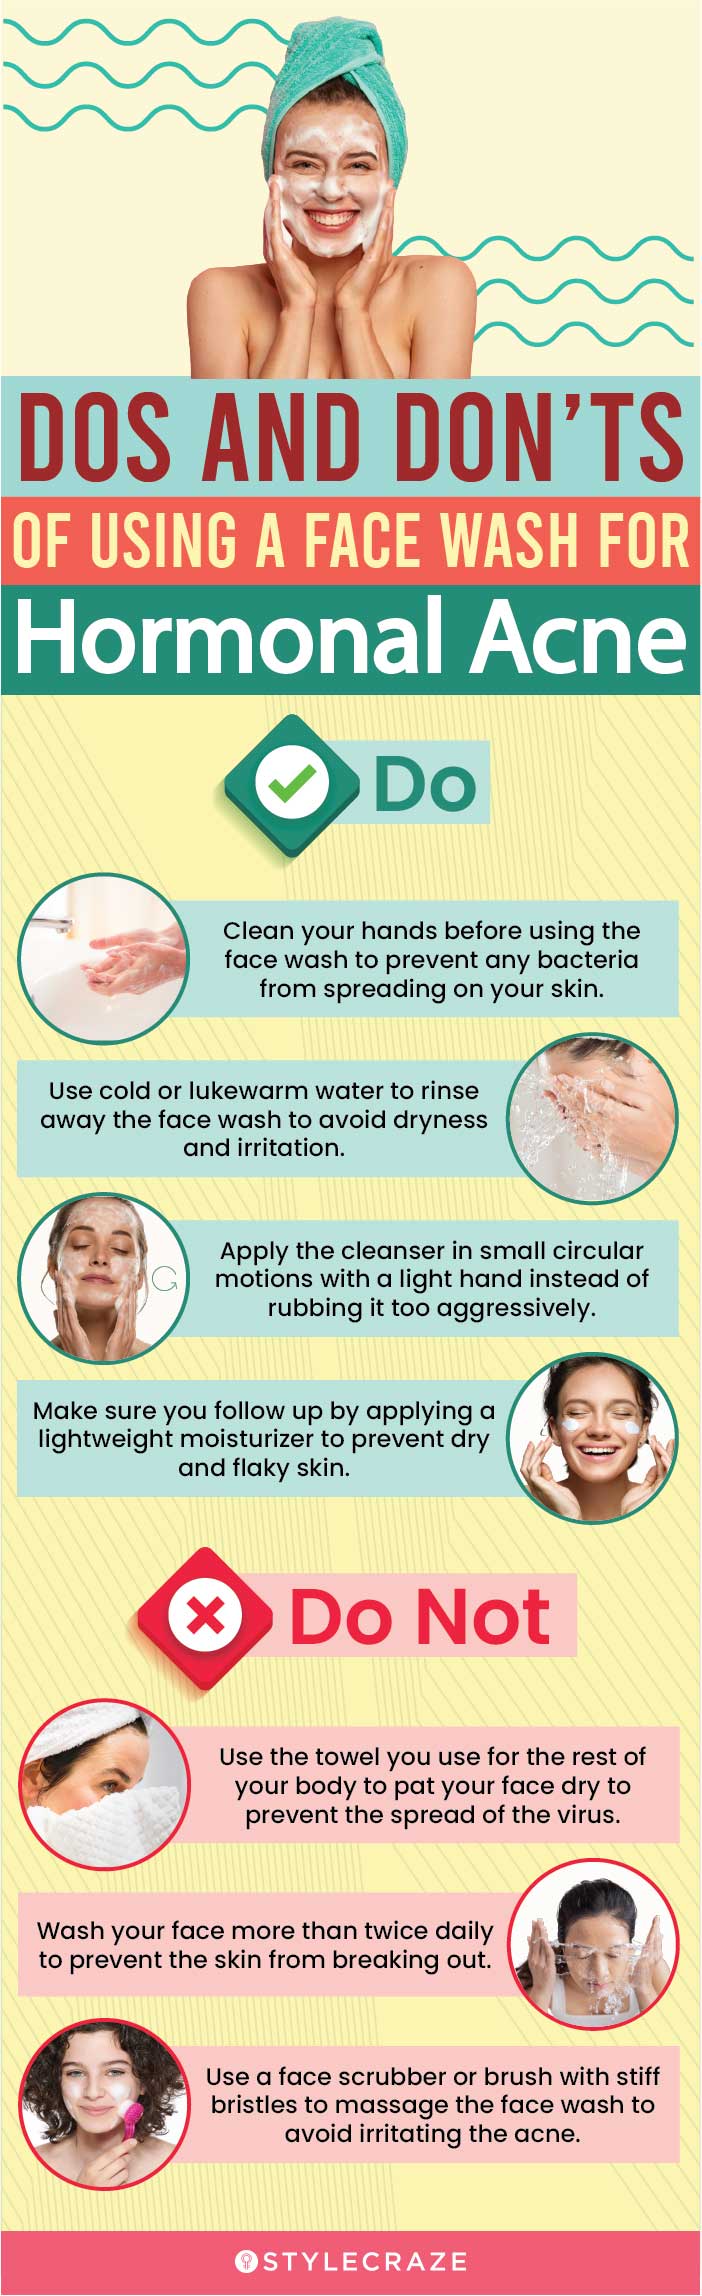 DOs And DON'Ts Of Using A Face Wash For Hormonal Acne (infographic)